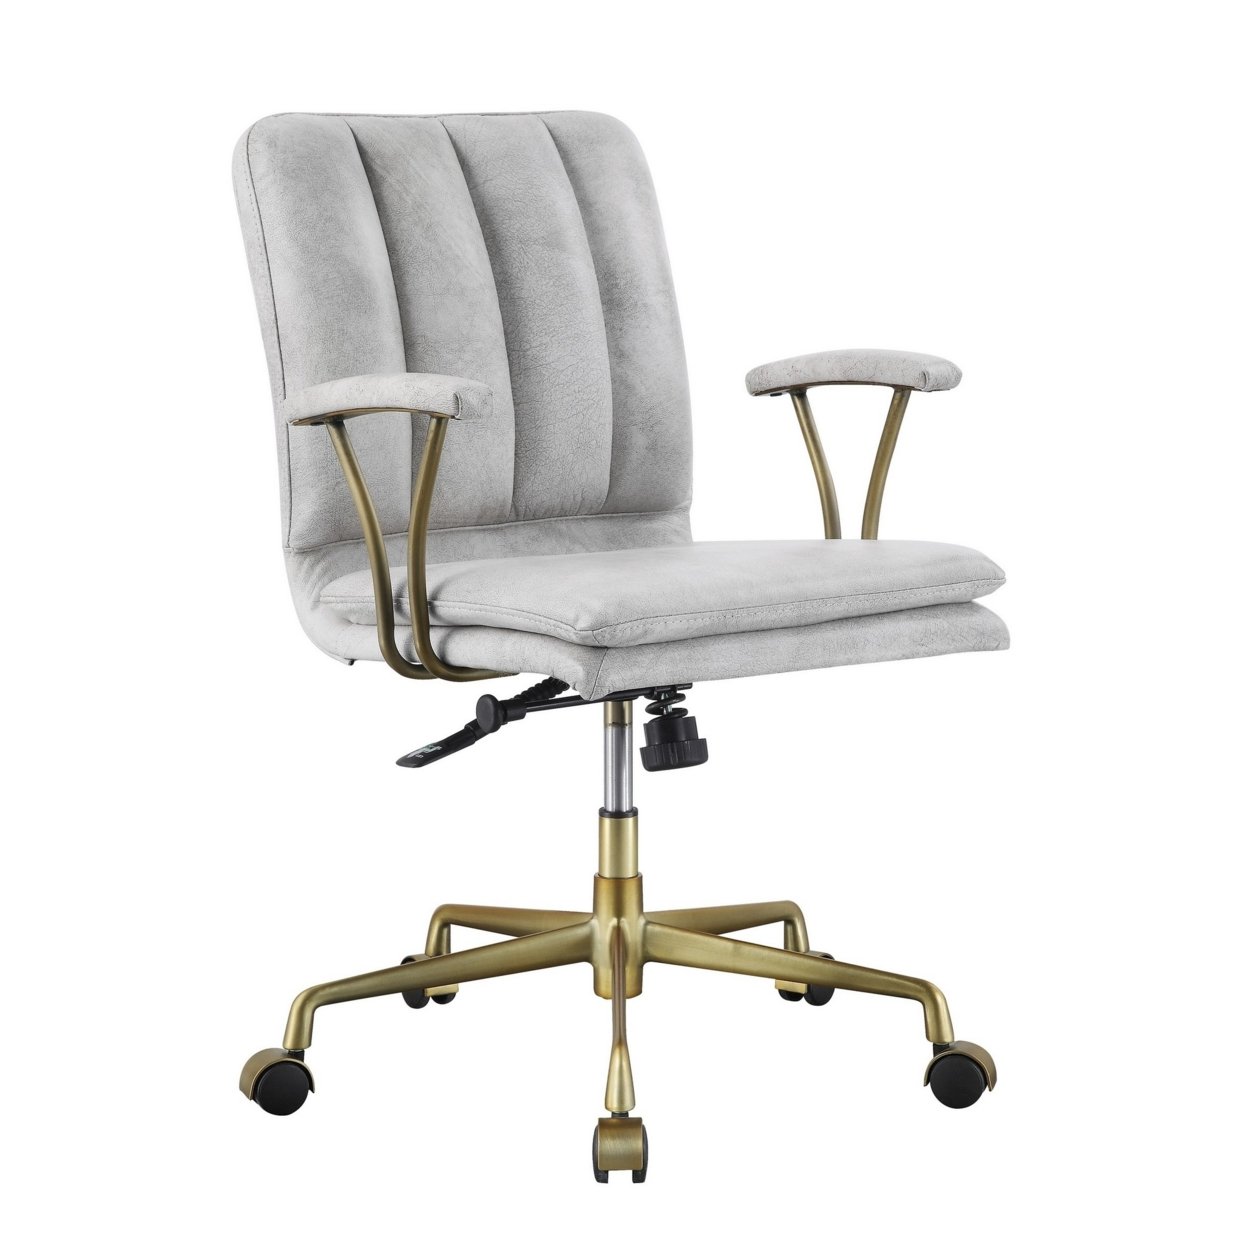 Adjustable Leatherette Swivel Office Chair With 5 Star Base, Gray And Gold- Saltoro Sherpi